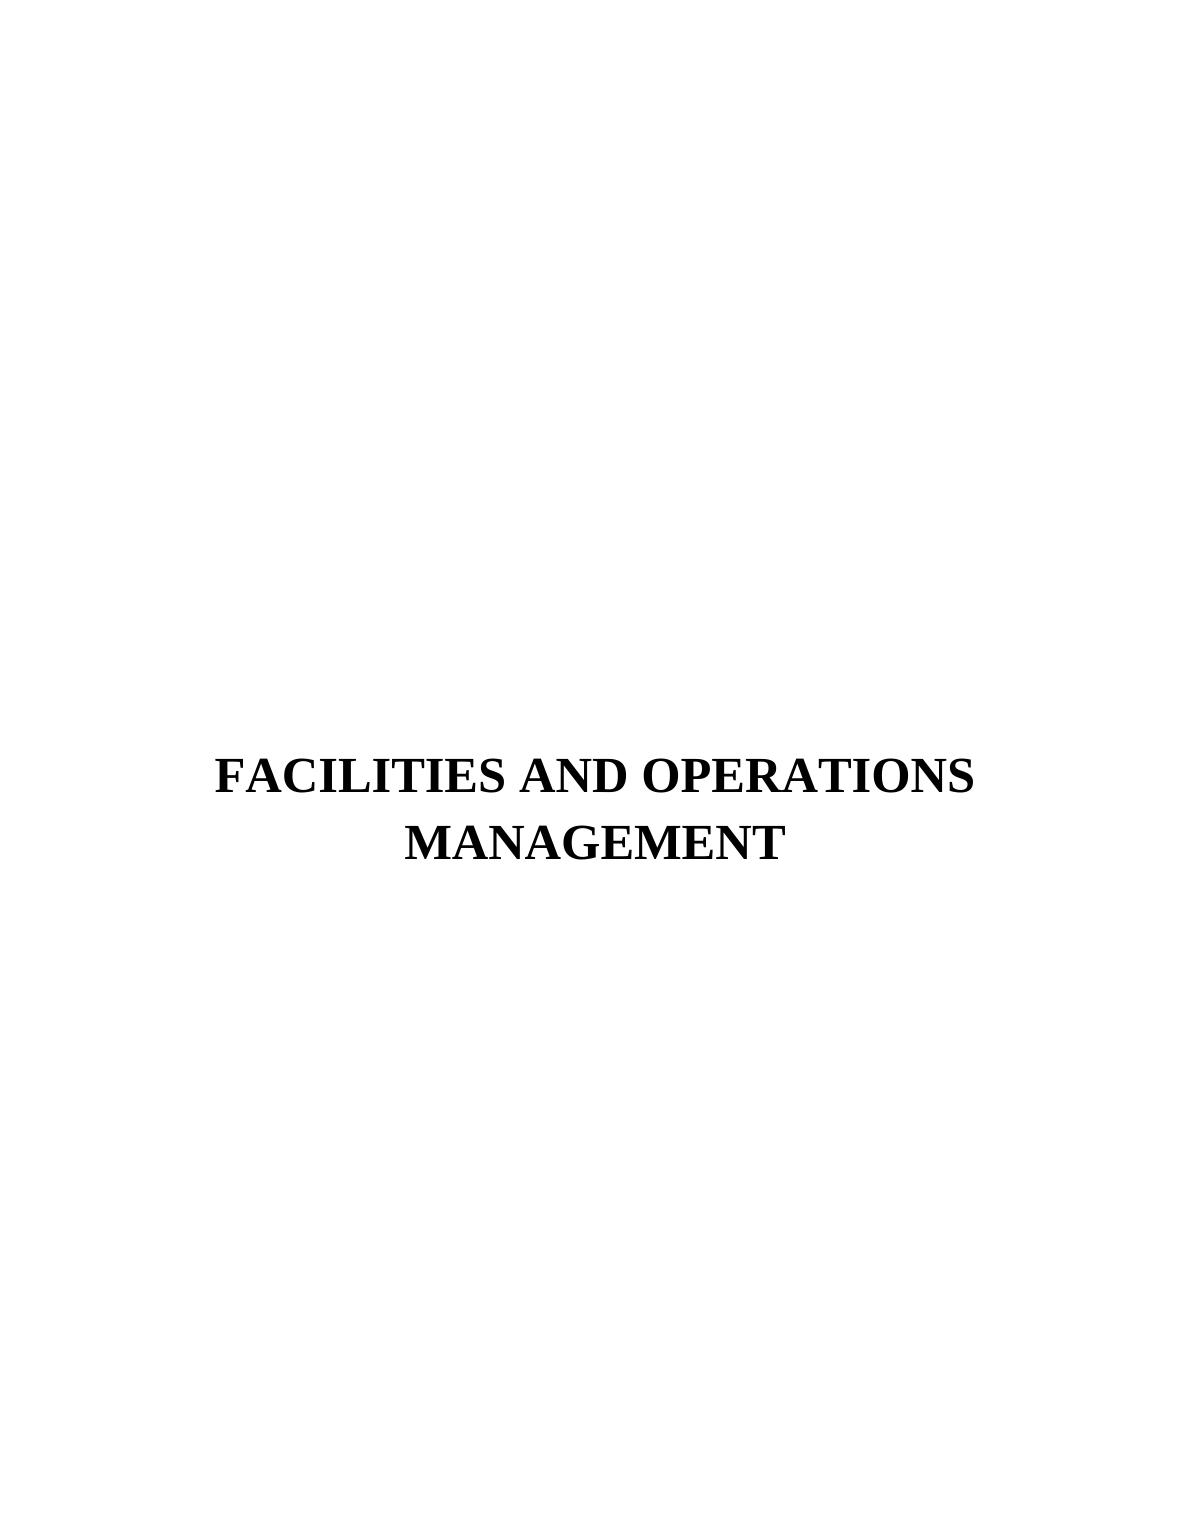 Facilities and Operations Management Assignment_1